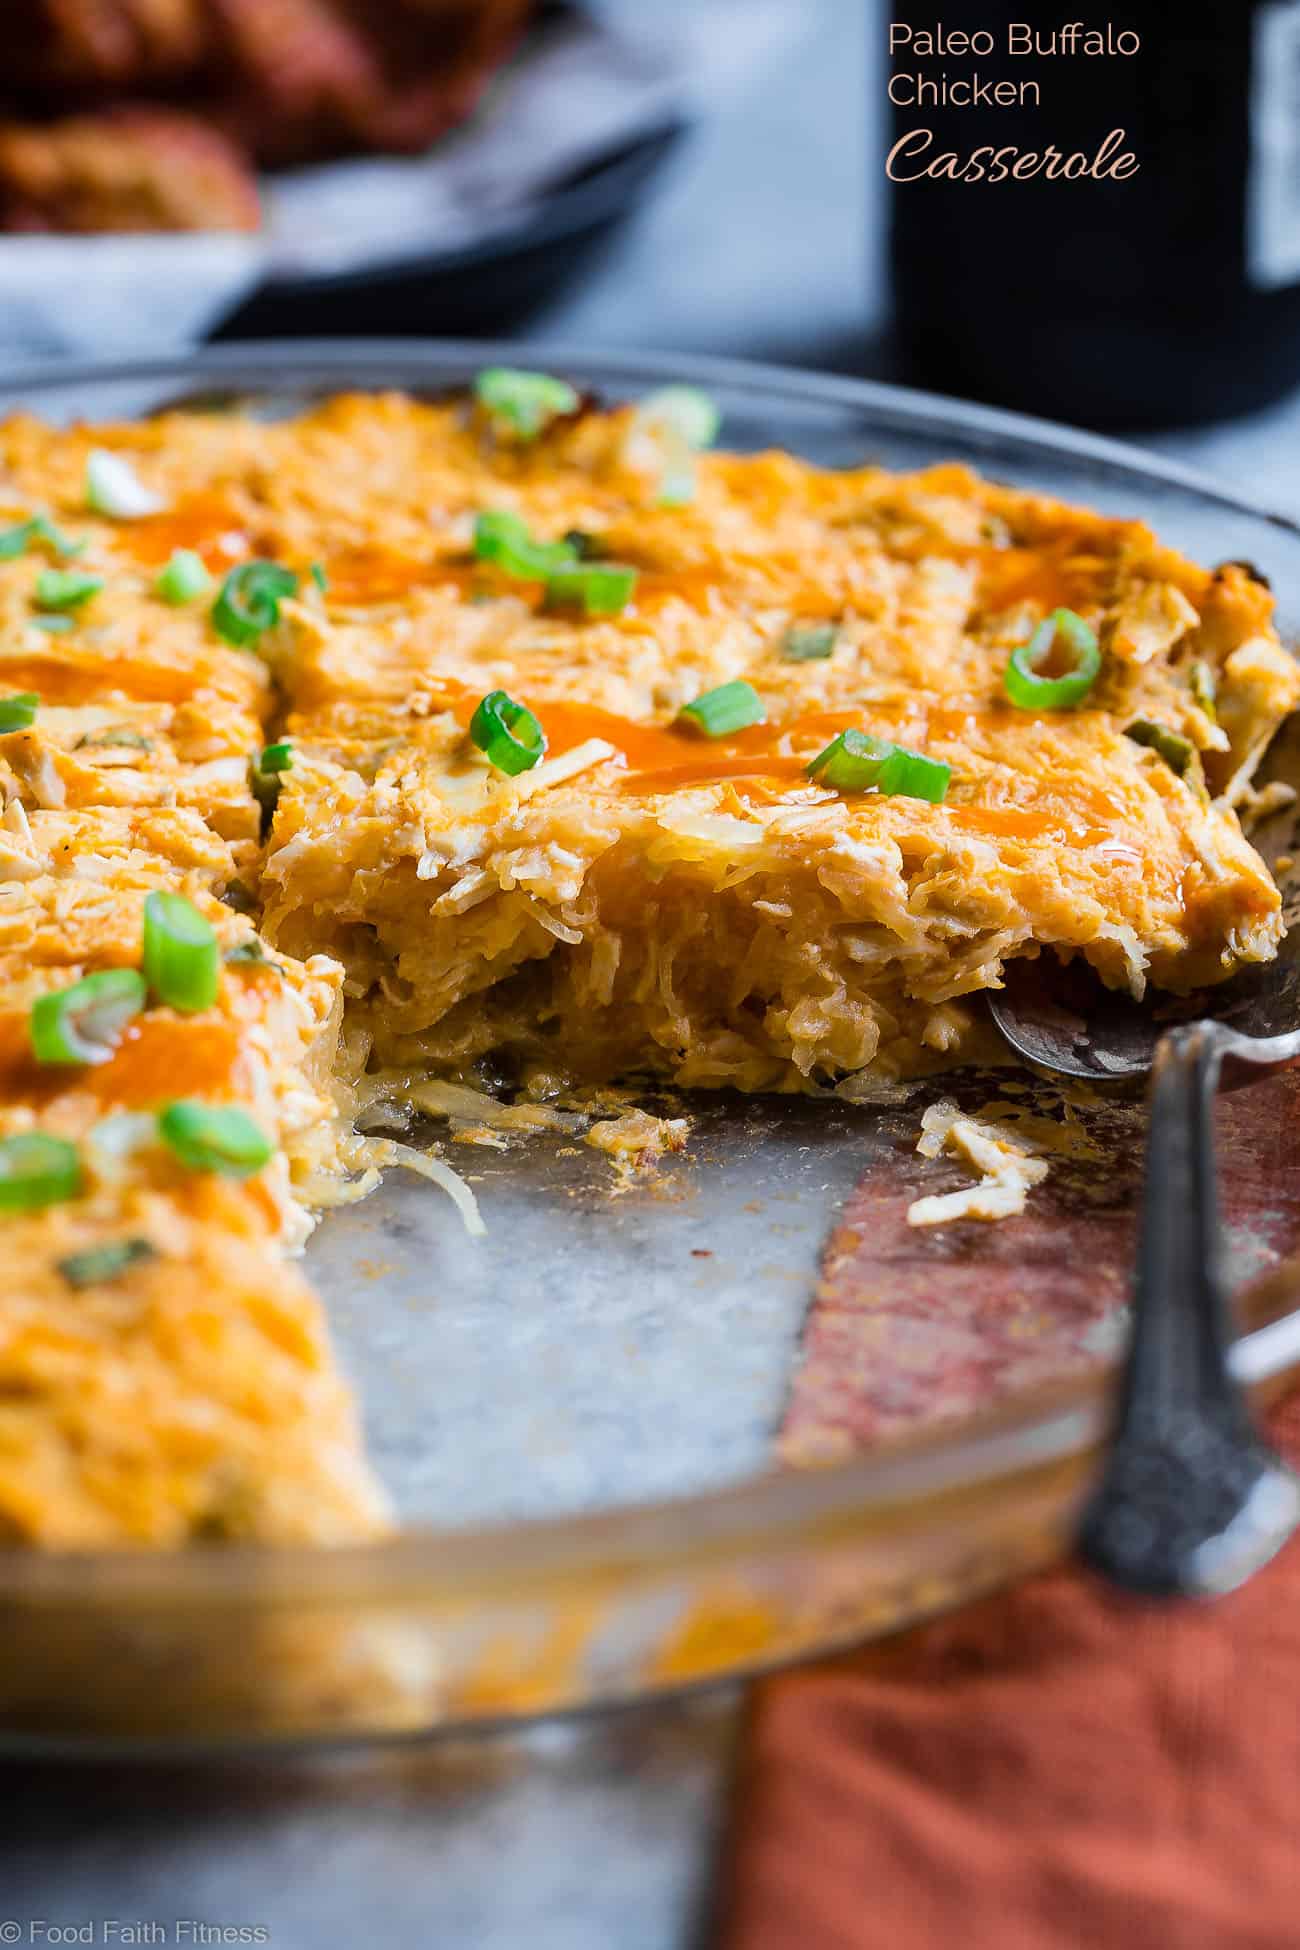 Paleo Buffalo Chicken Baked Spaghetti Squash Casserole -  This EASY, keto and whole30 casserole is only 7 ingredients, 320 calories and packed with protein! It's a family friendly, low carb, weeknight dinner that even picky eaters will love! | #Foodfaithfitness | #Keto #paleo #glutenfree #whole30 #kidfriendly